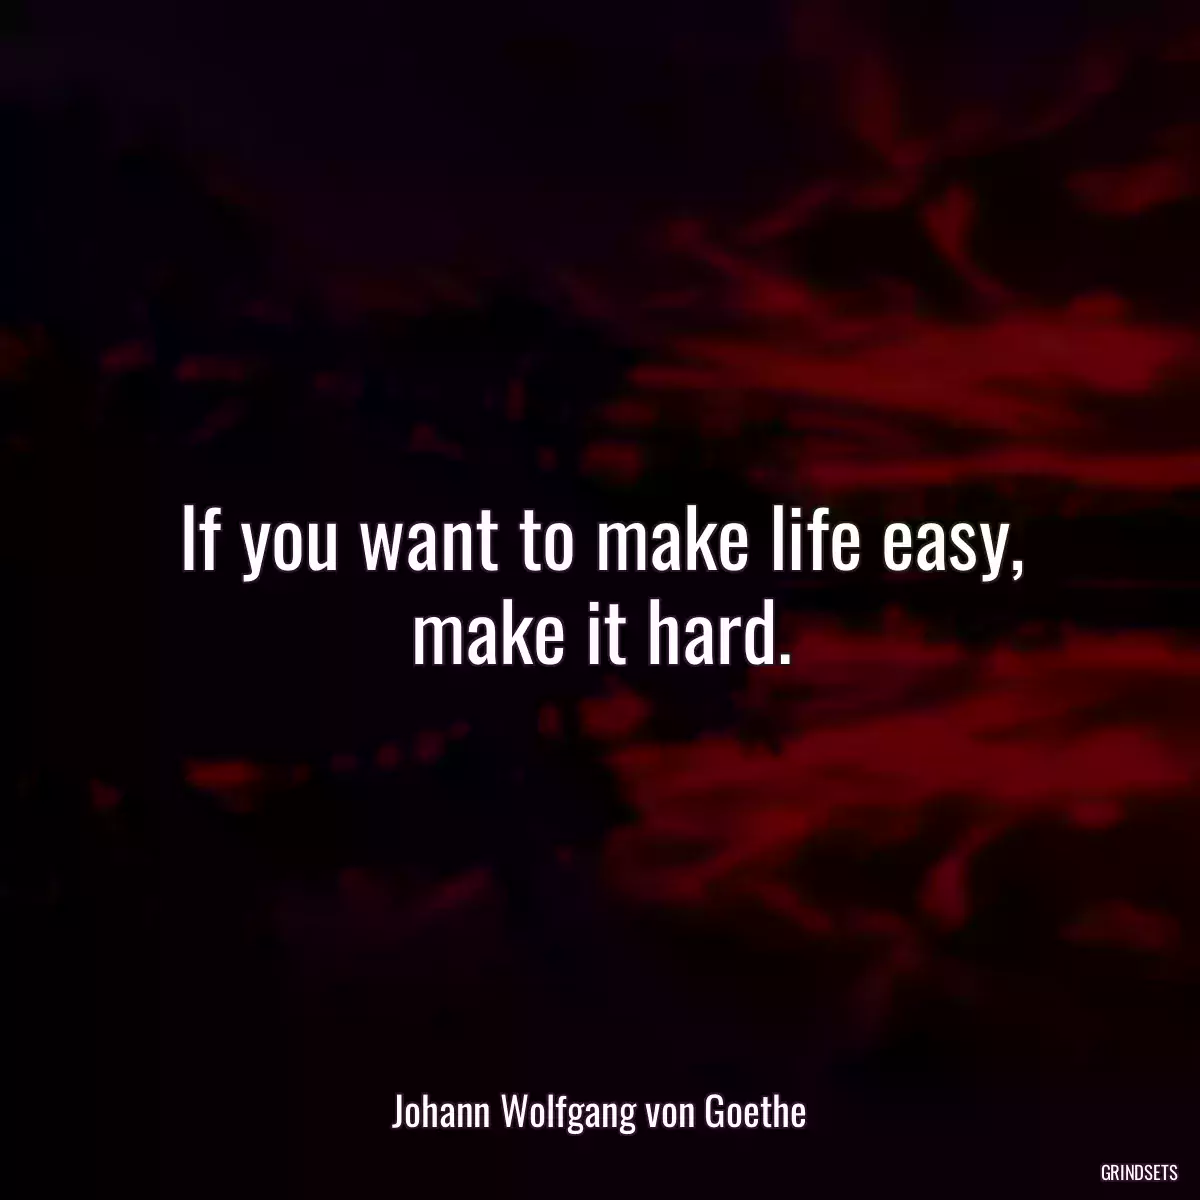 If you want to make life easy, make it hard.